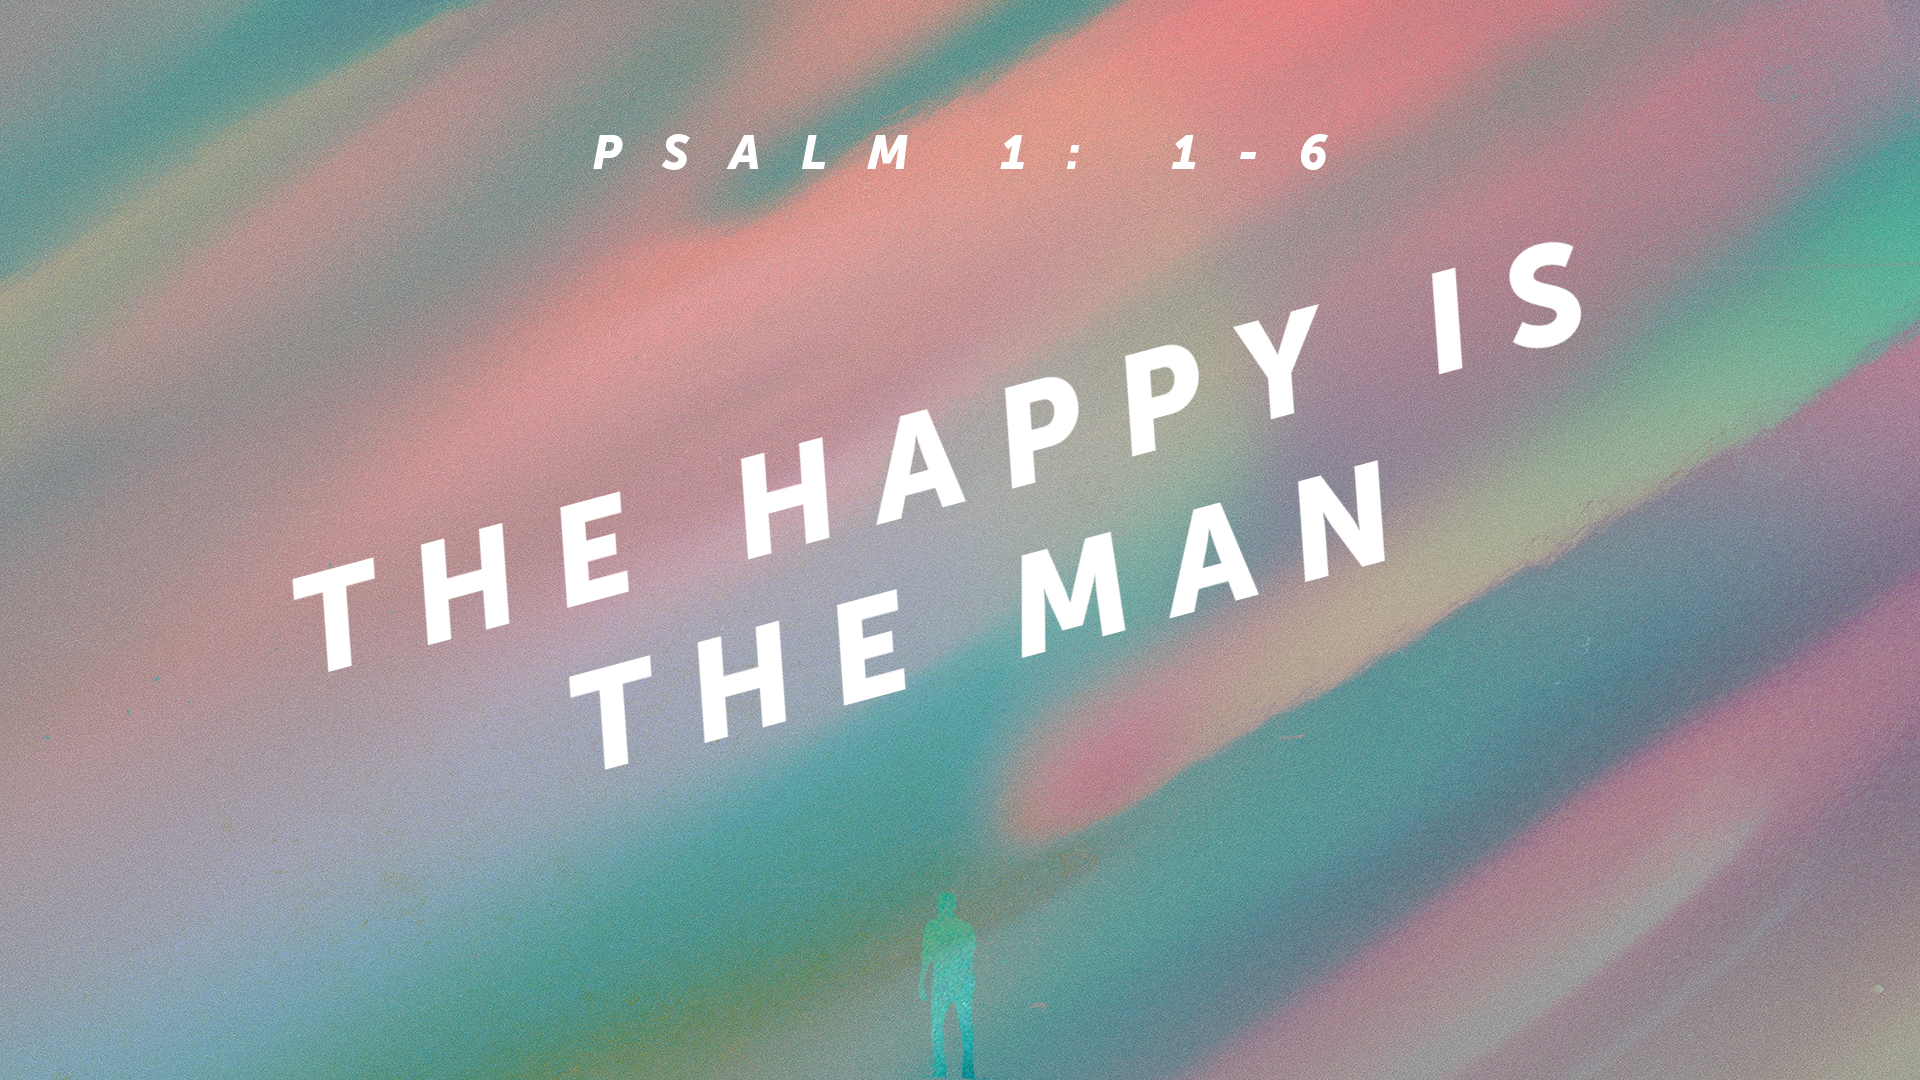 May 24, 2020 - Happy Is The Man (Video) Psalm 1:1-6